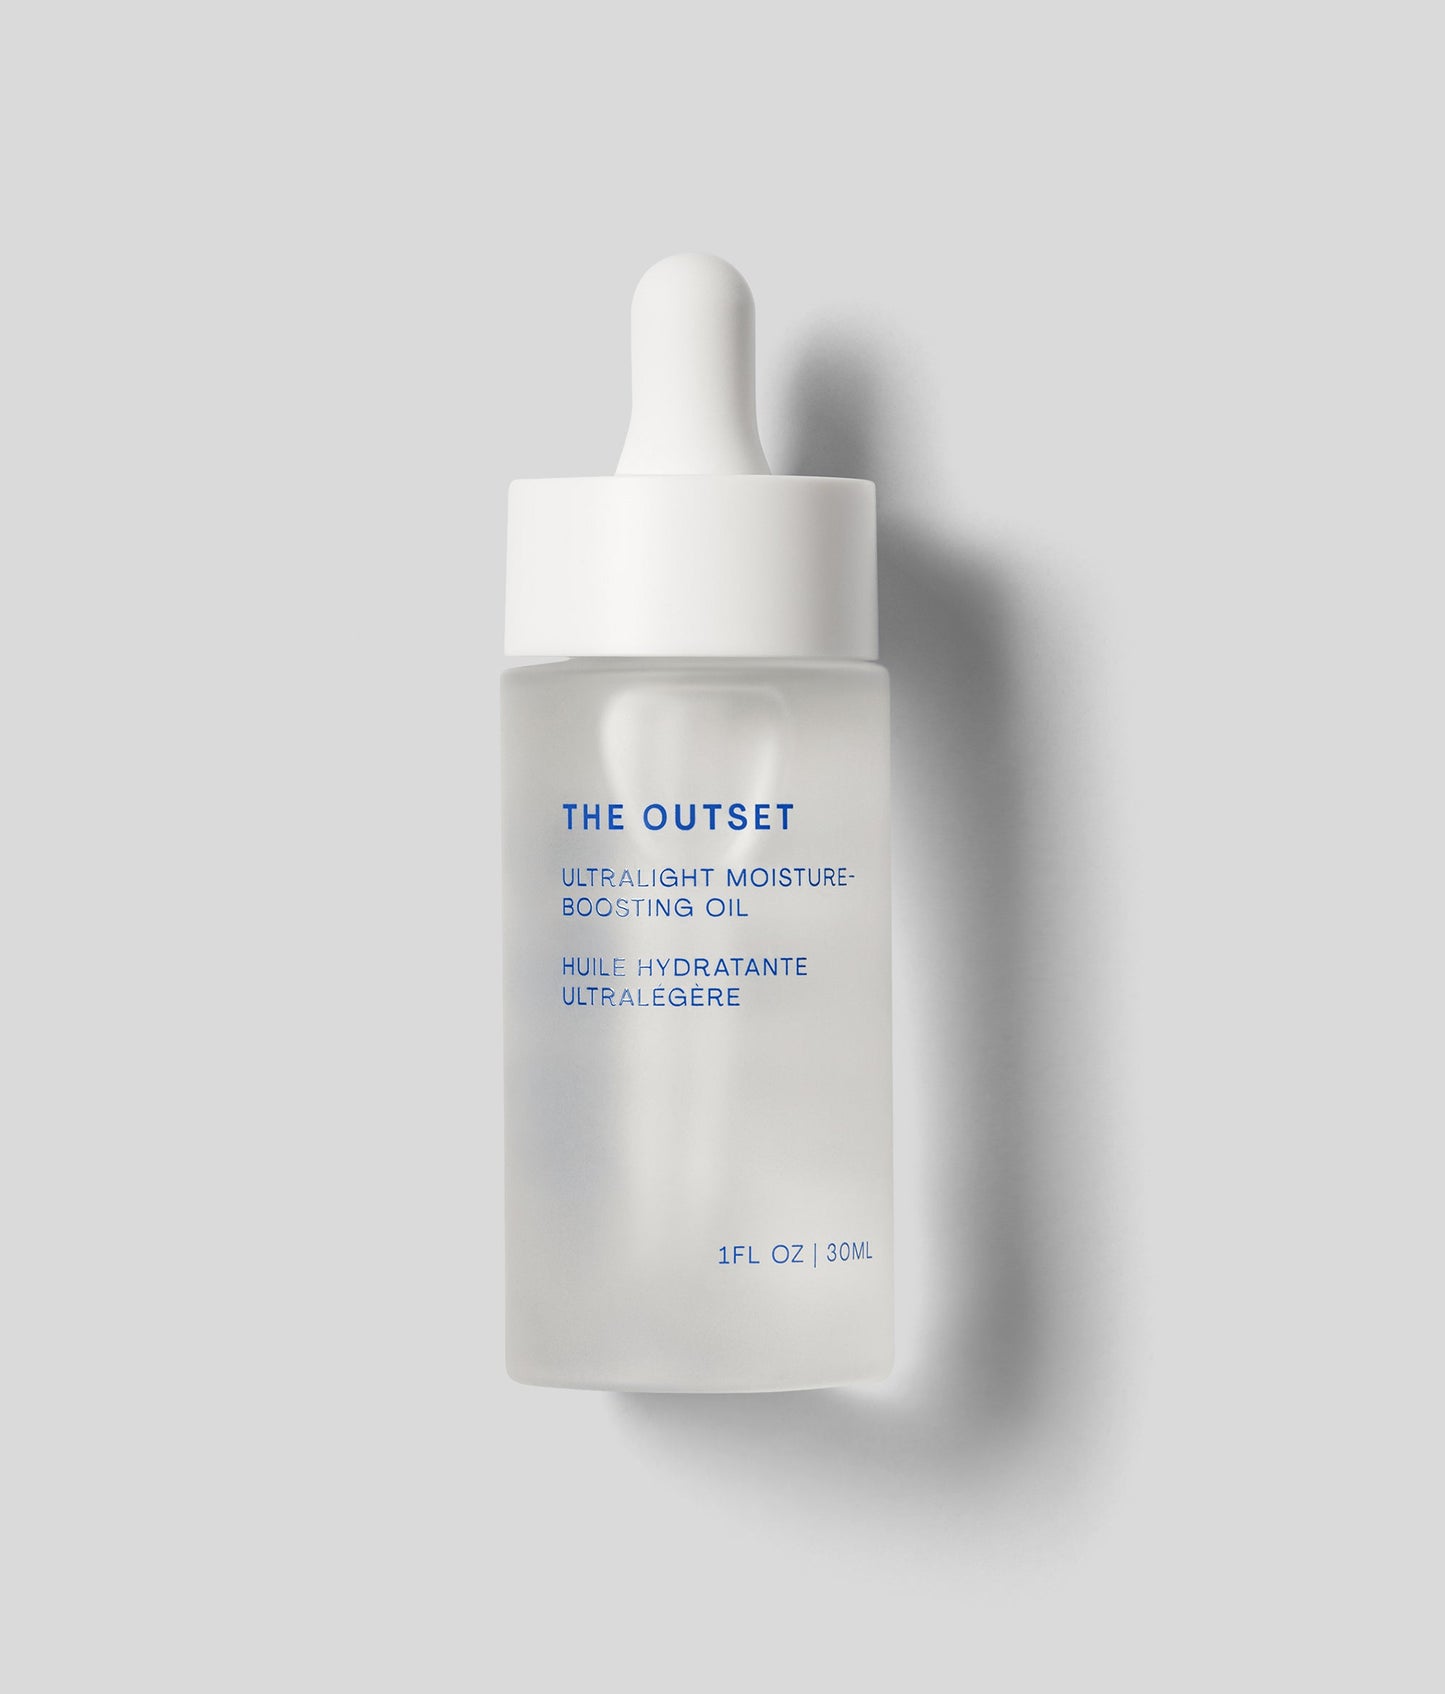 Photo of The Outset's ultralight moisture-boosting oil